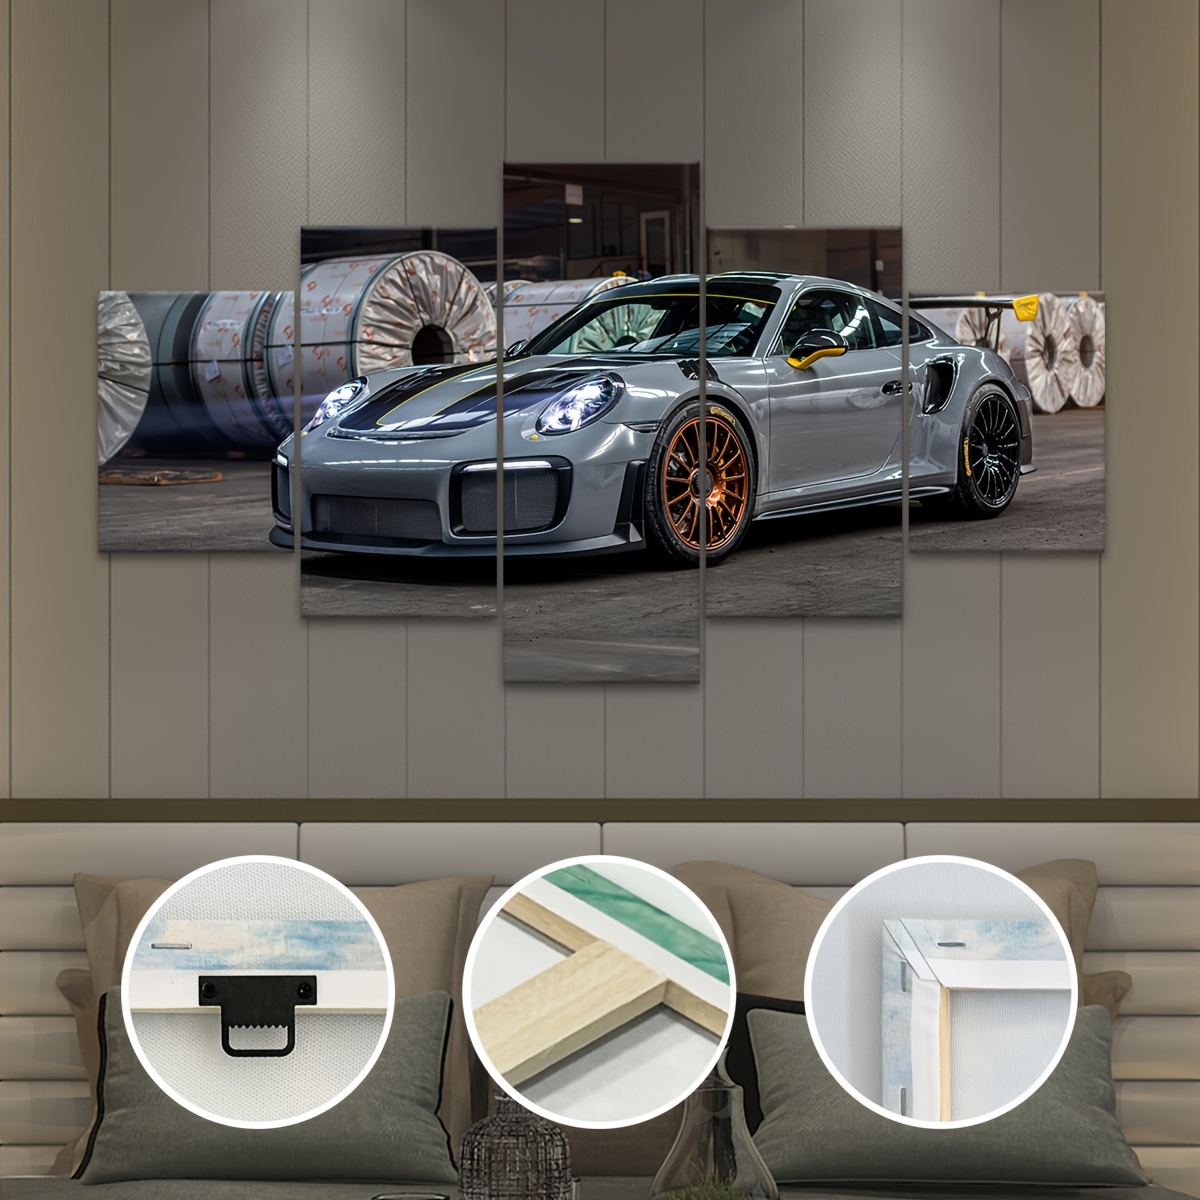 

5pcs/set Wooden Framed Canvas Poster, Modern Art, Fashion Sports Cars Canvas Poster, Ideal Gift For Bedroom Living Room Corridor, Wall Art, Wall Decor, Winter Decor, Wall Decor, Room Decoration